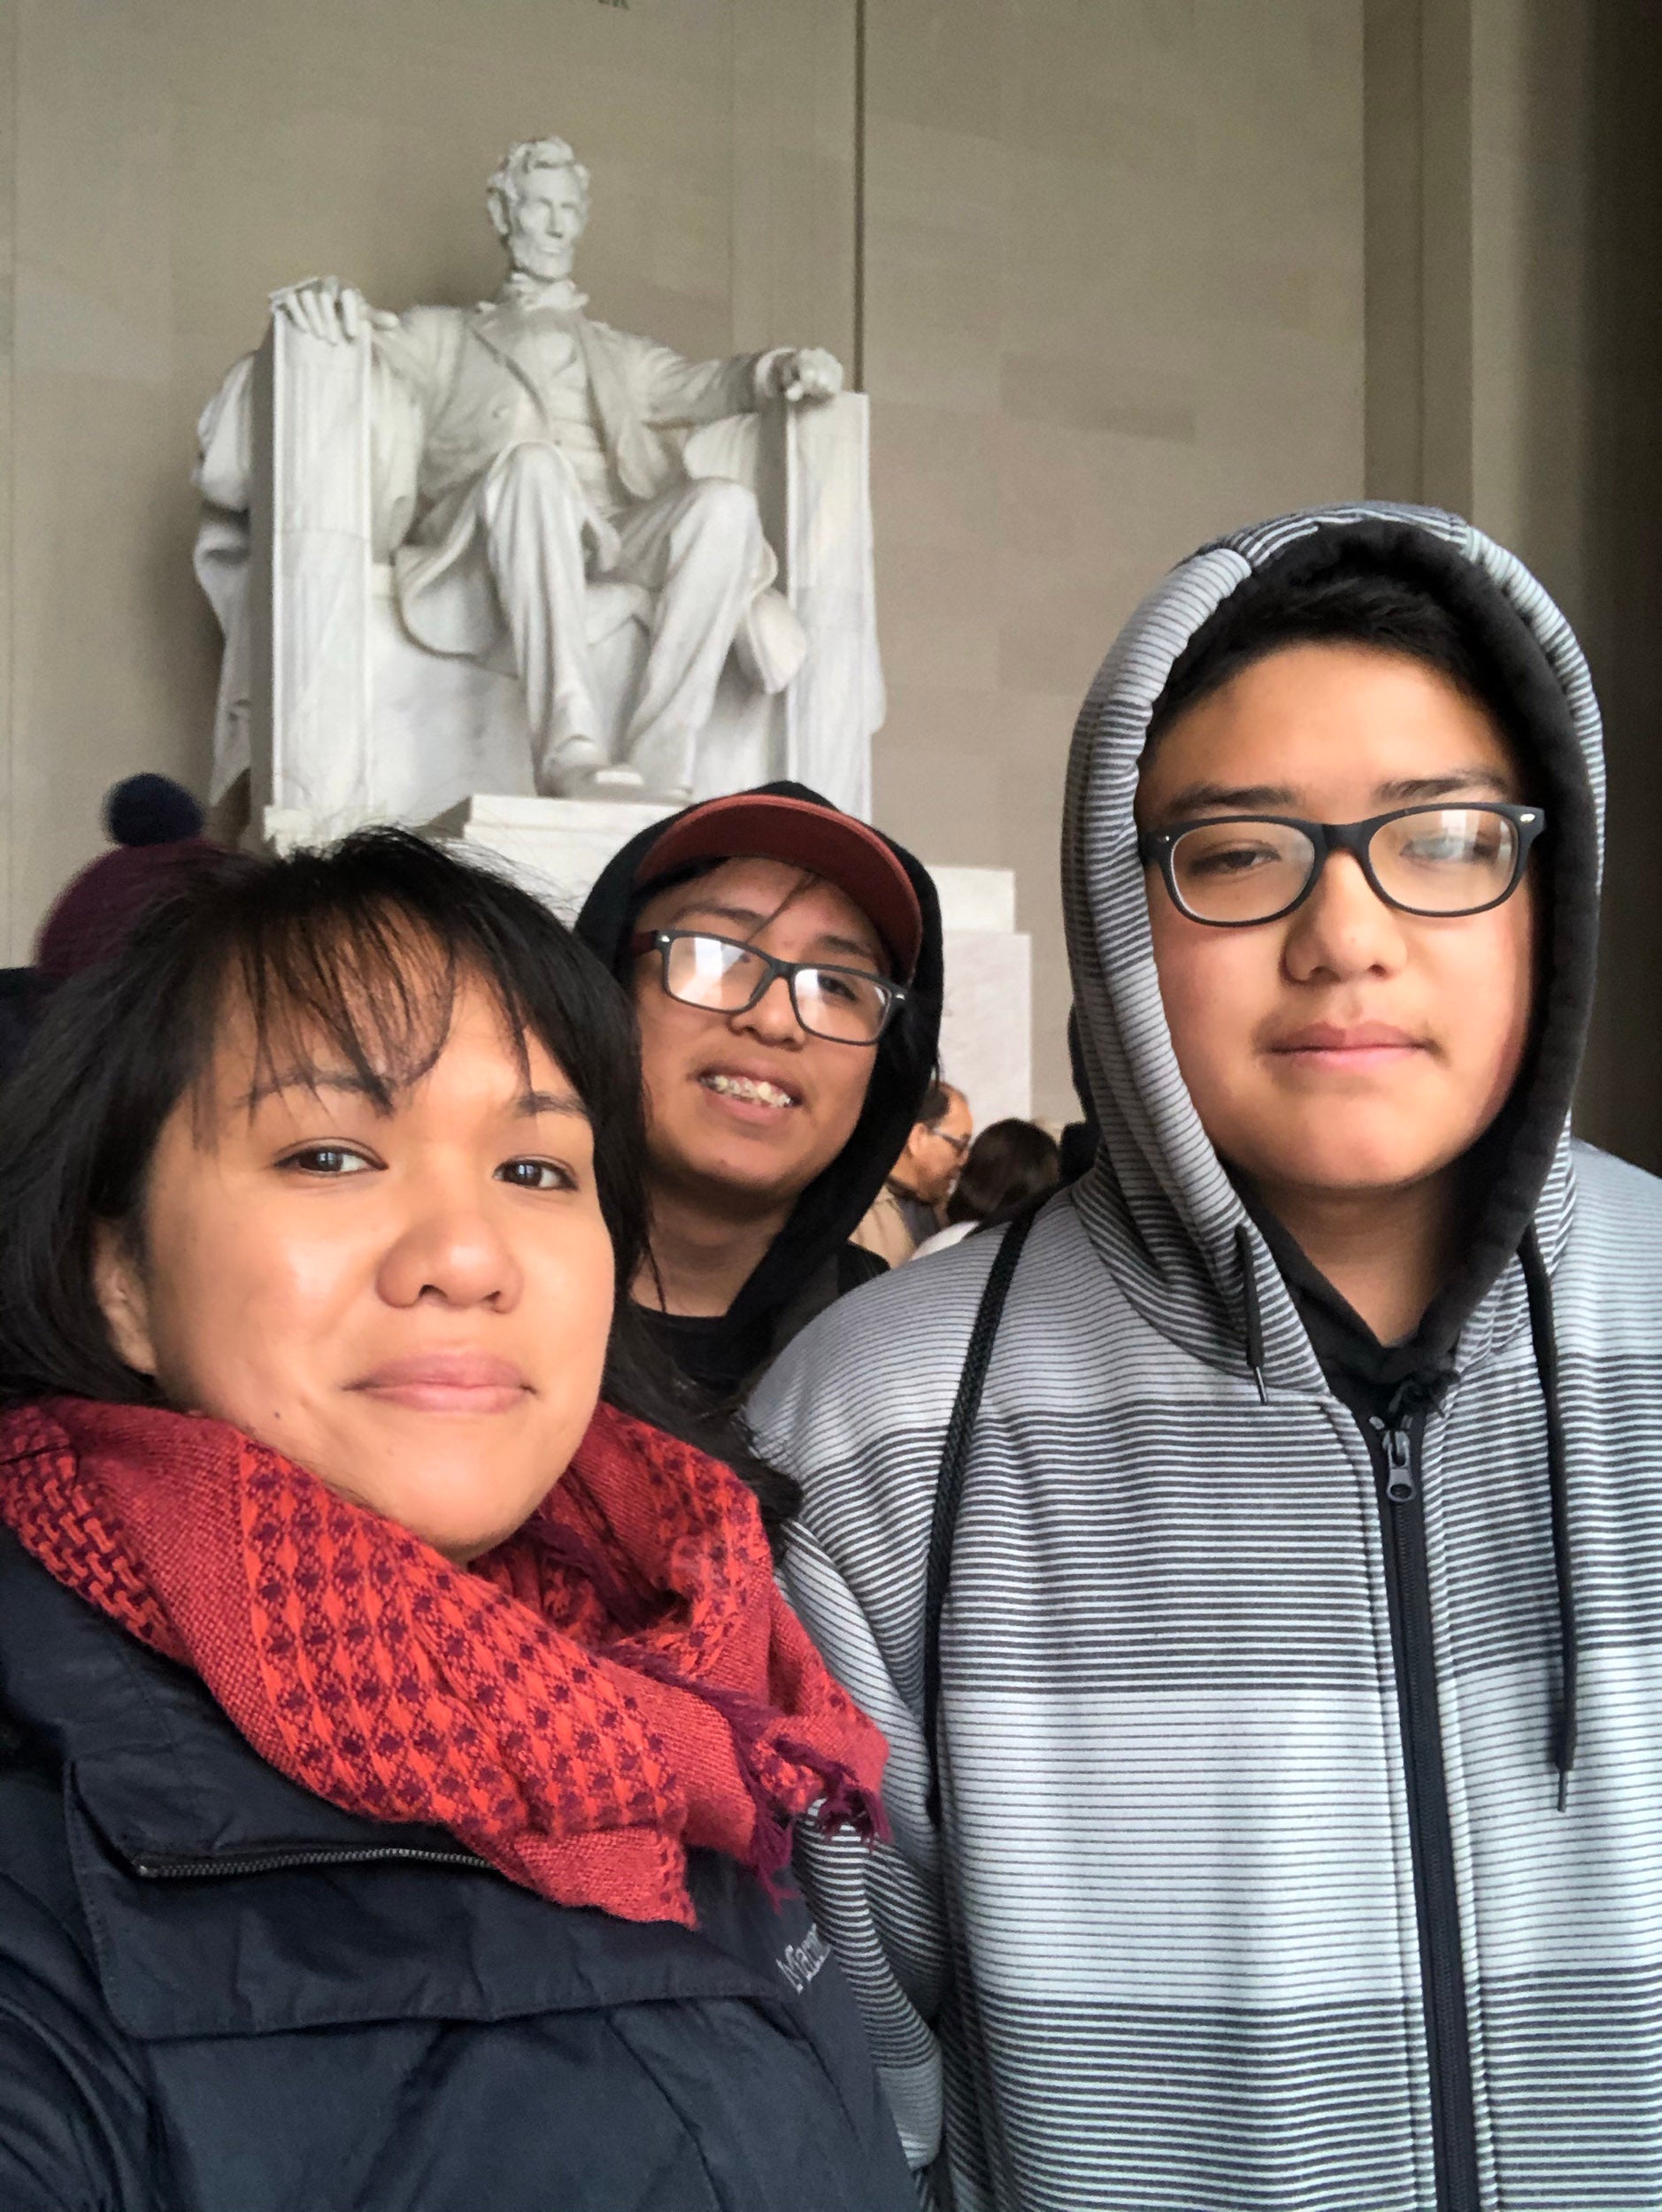 Heidi Brandow with her two sons Kian, 14, center, and Mateo, 15.